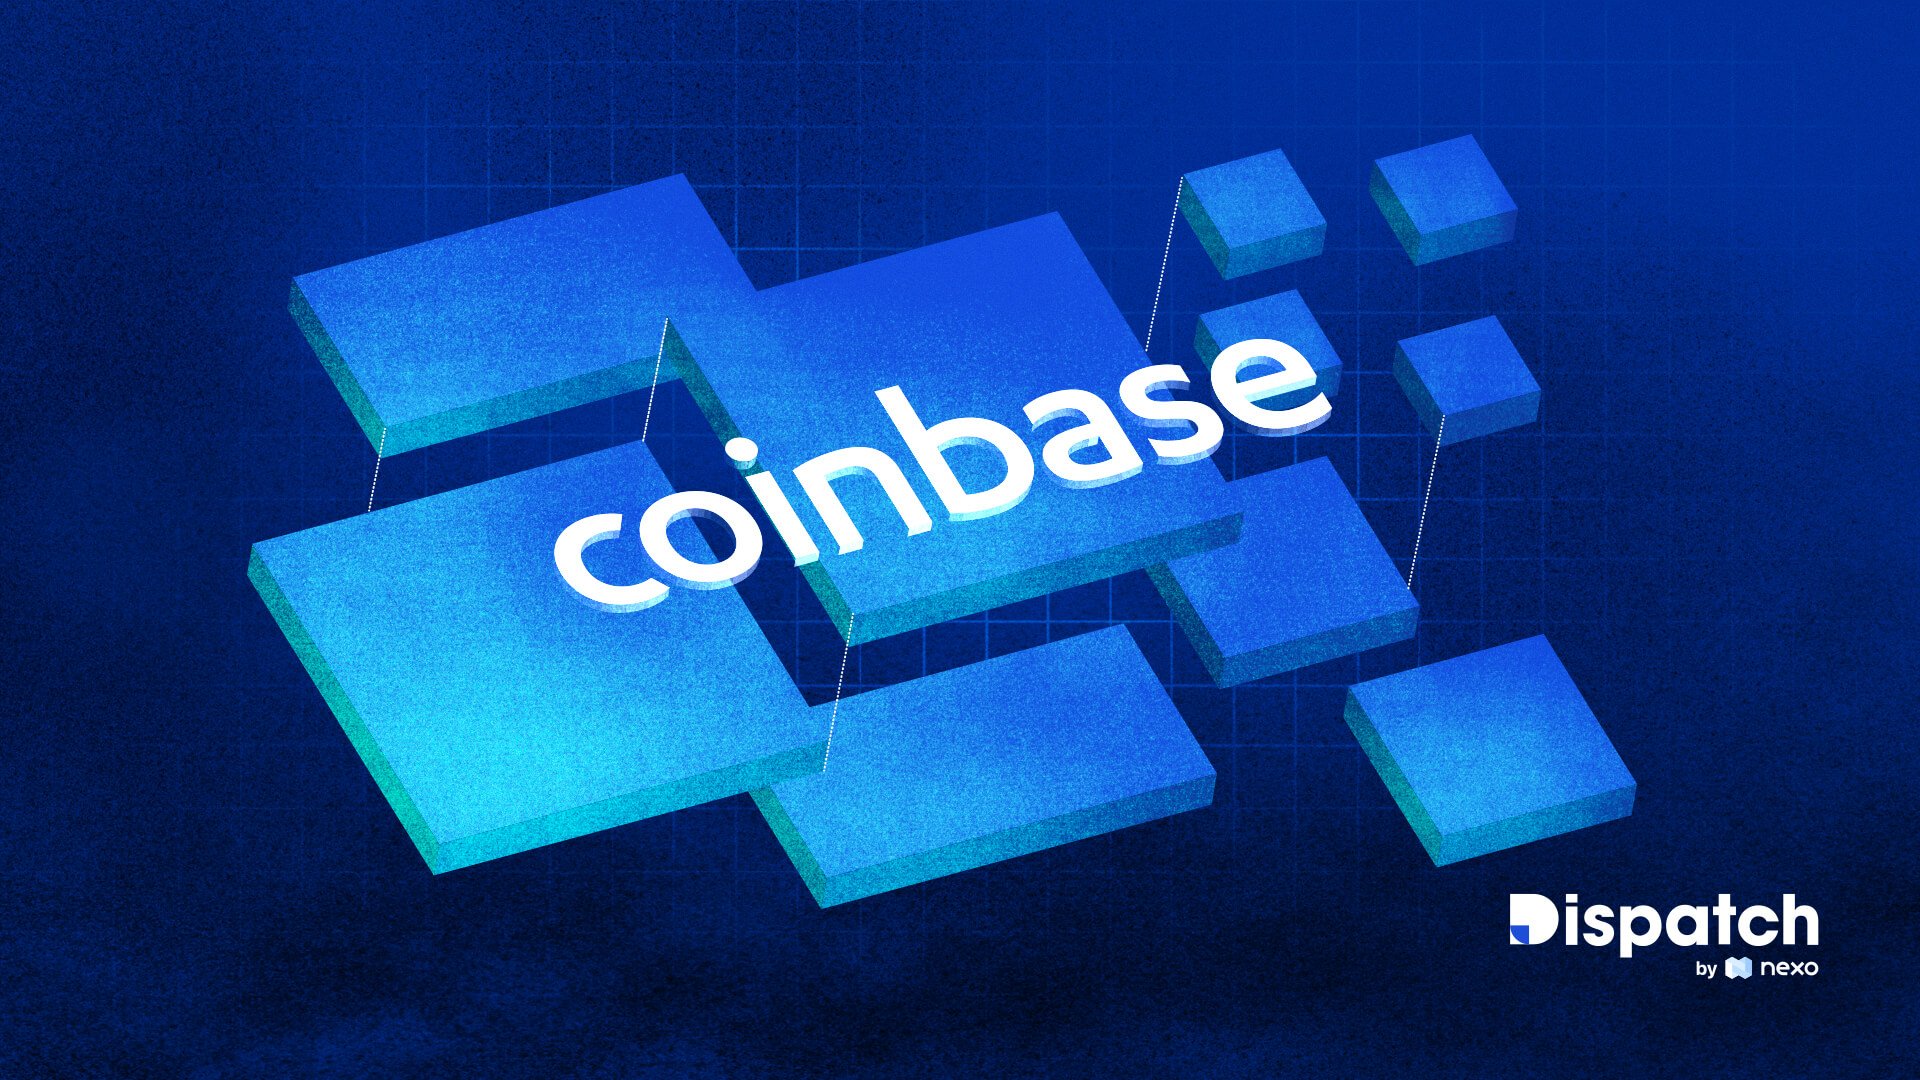 Dispatch #30: Coinbase Prepares to IPO on the Back of a Massive Quarter